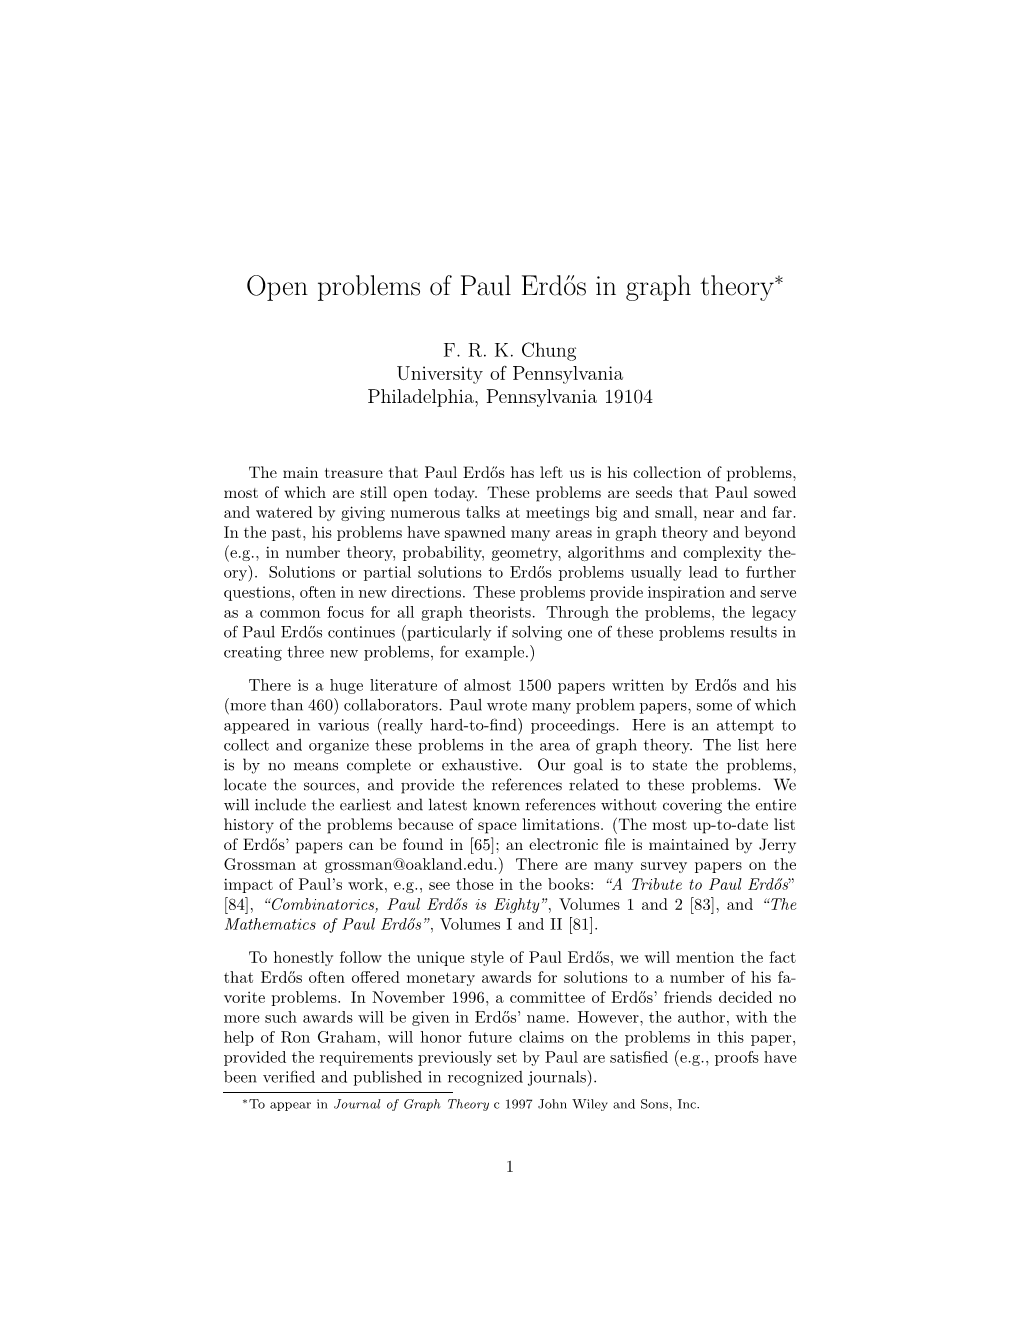 Open Problems of Paul Erd˝Os in Graph Theory∗